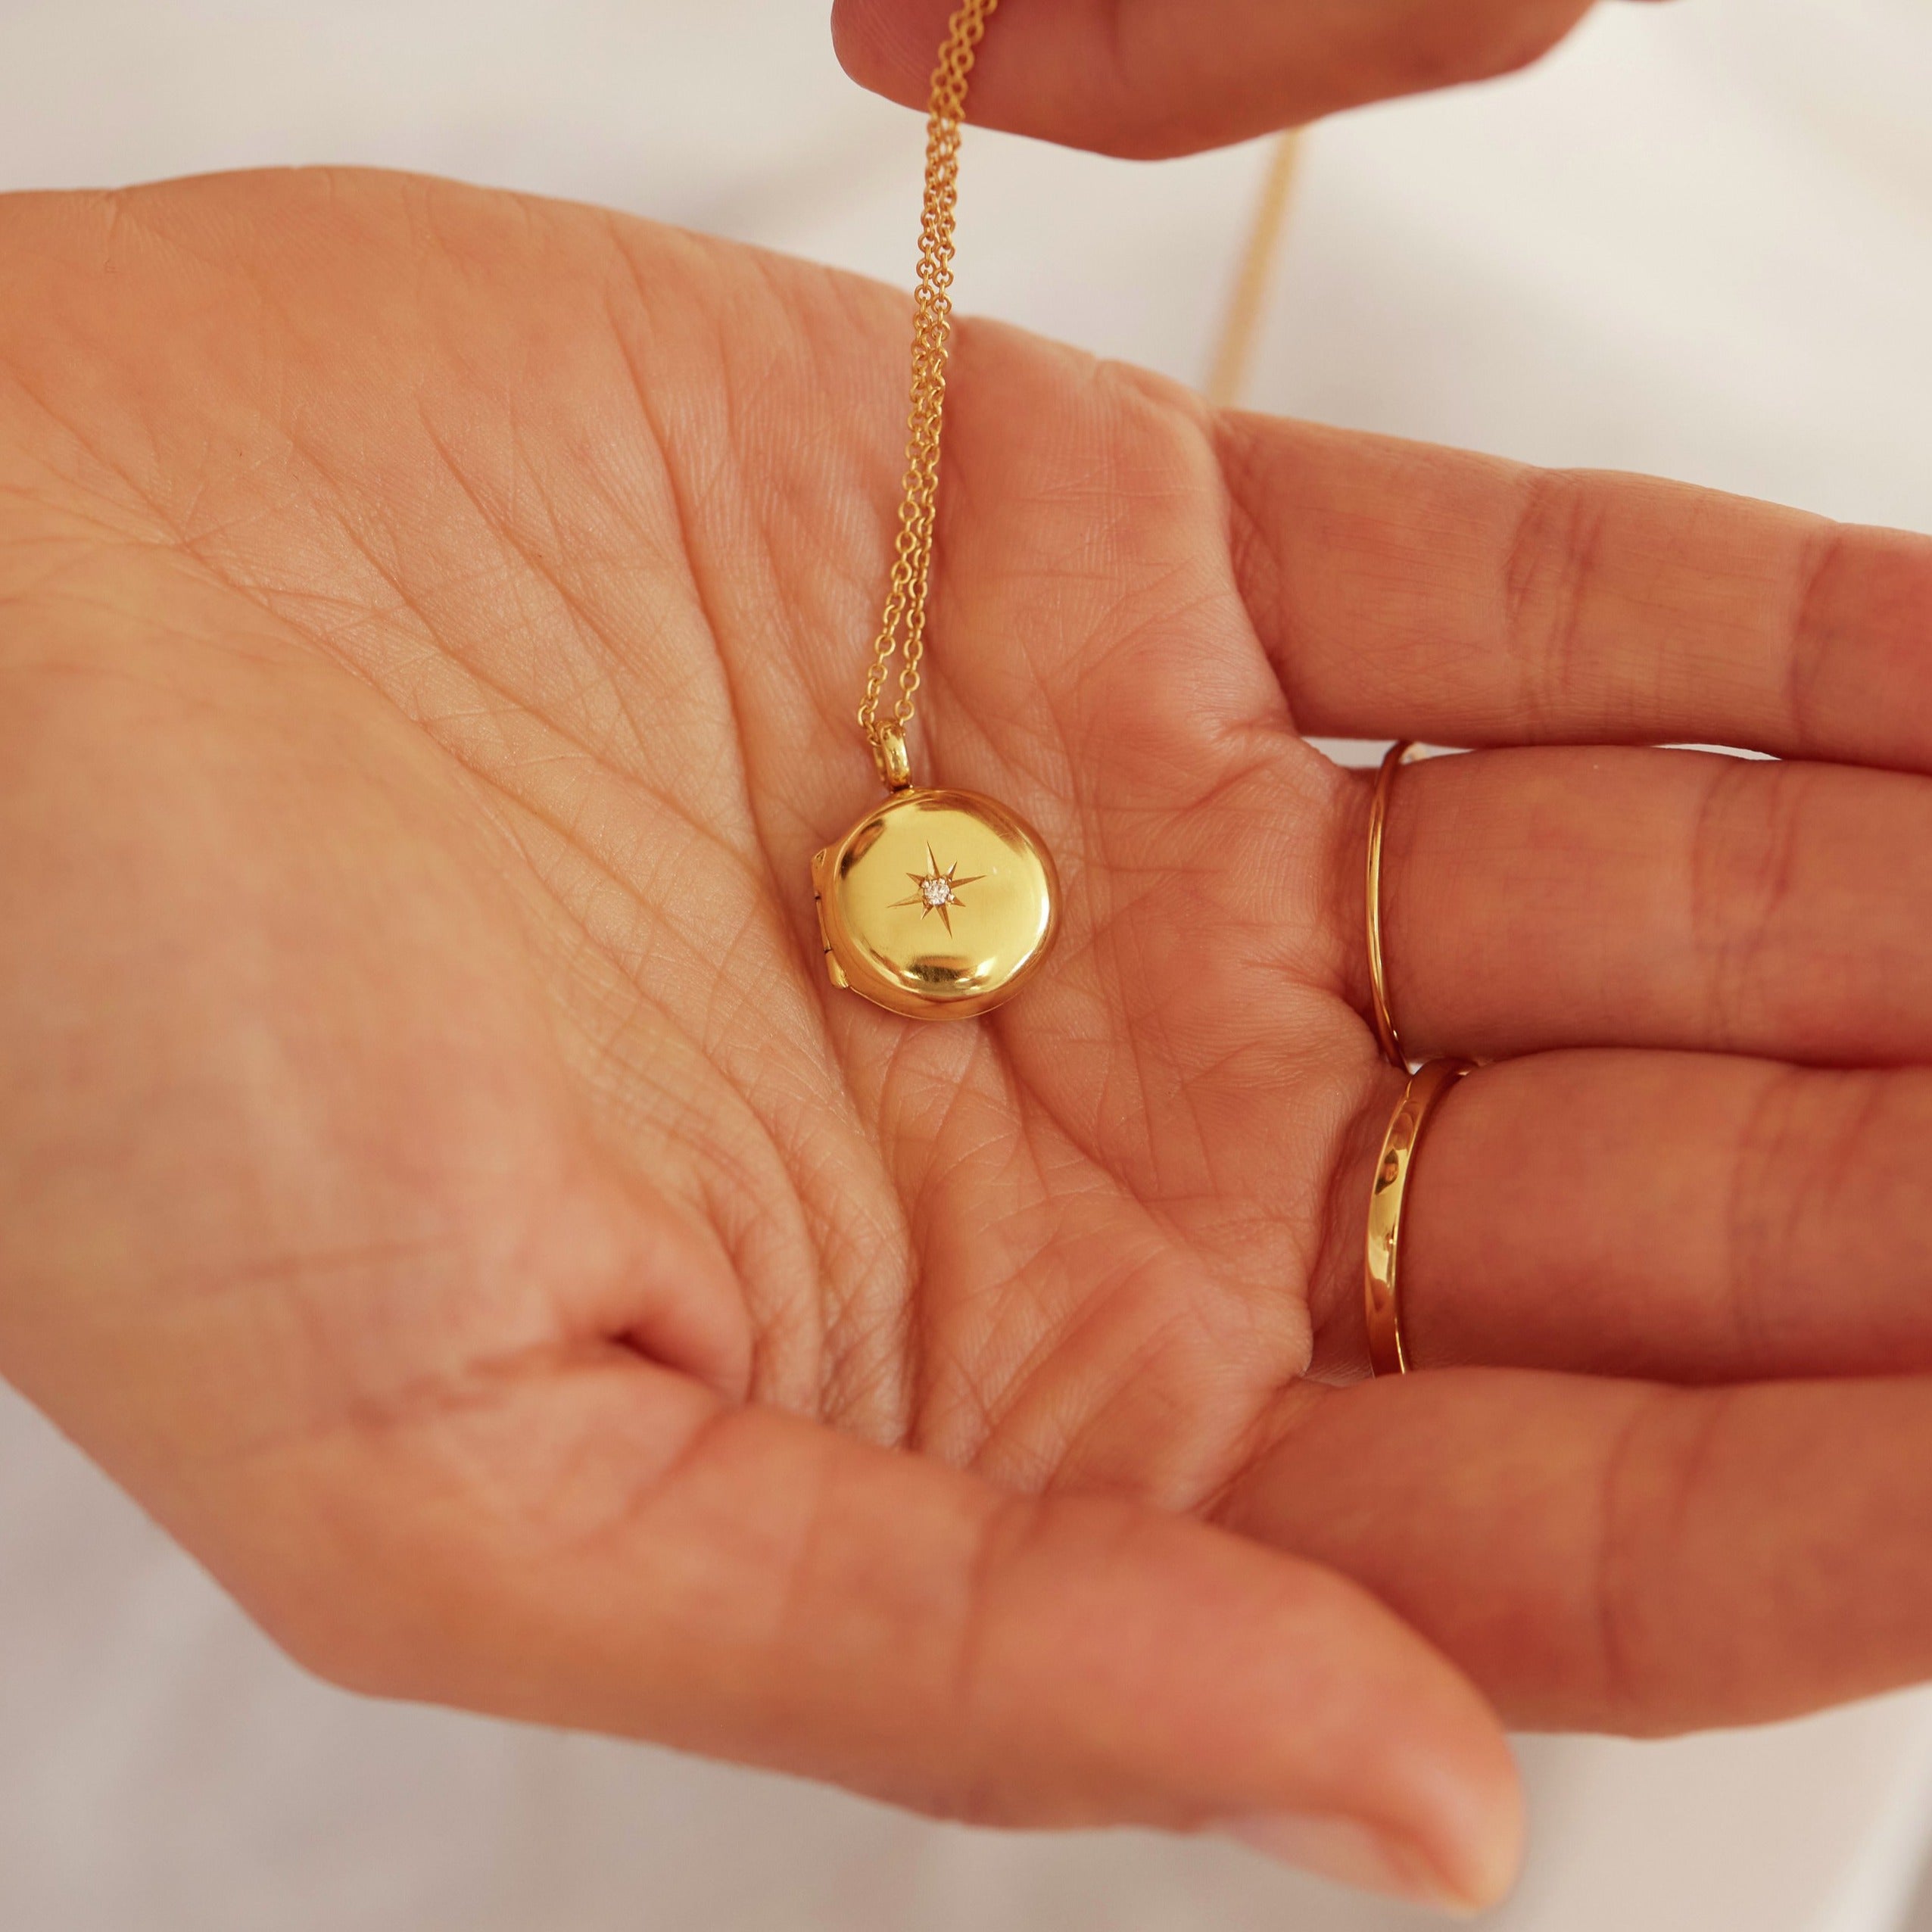 A gold small round diamond locket necklace in the palm of a woman's hand